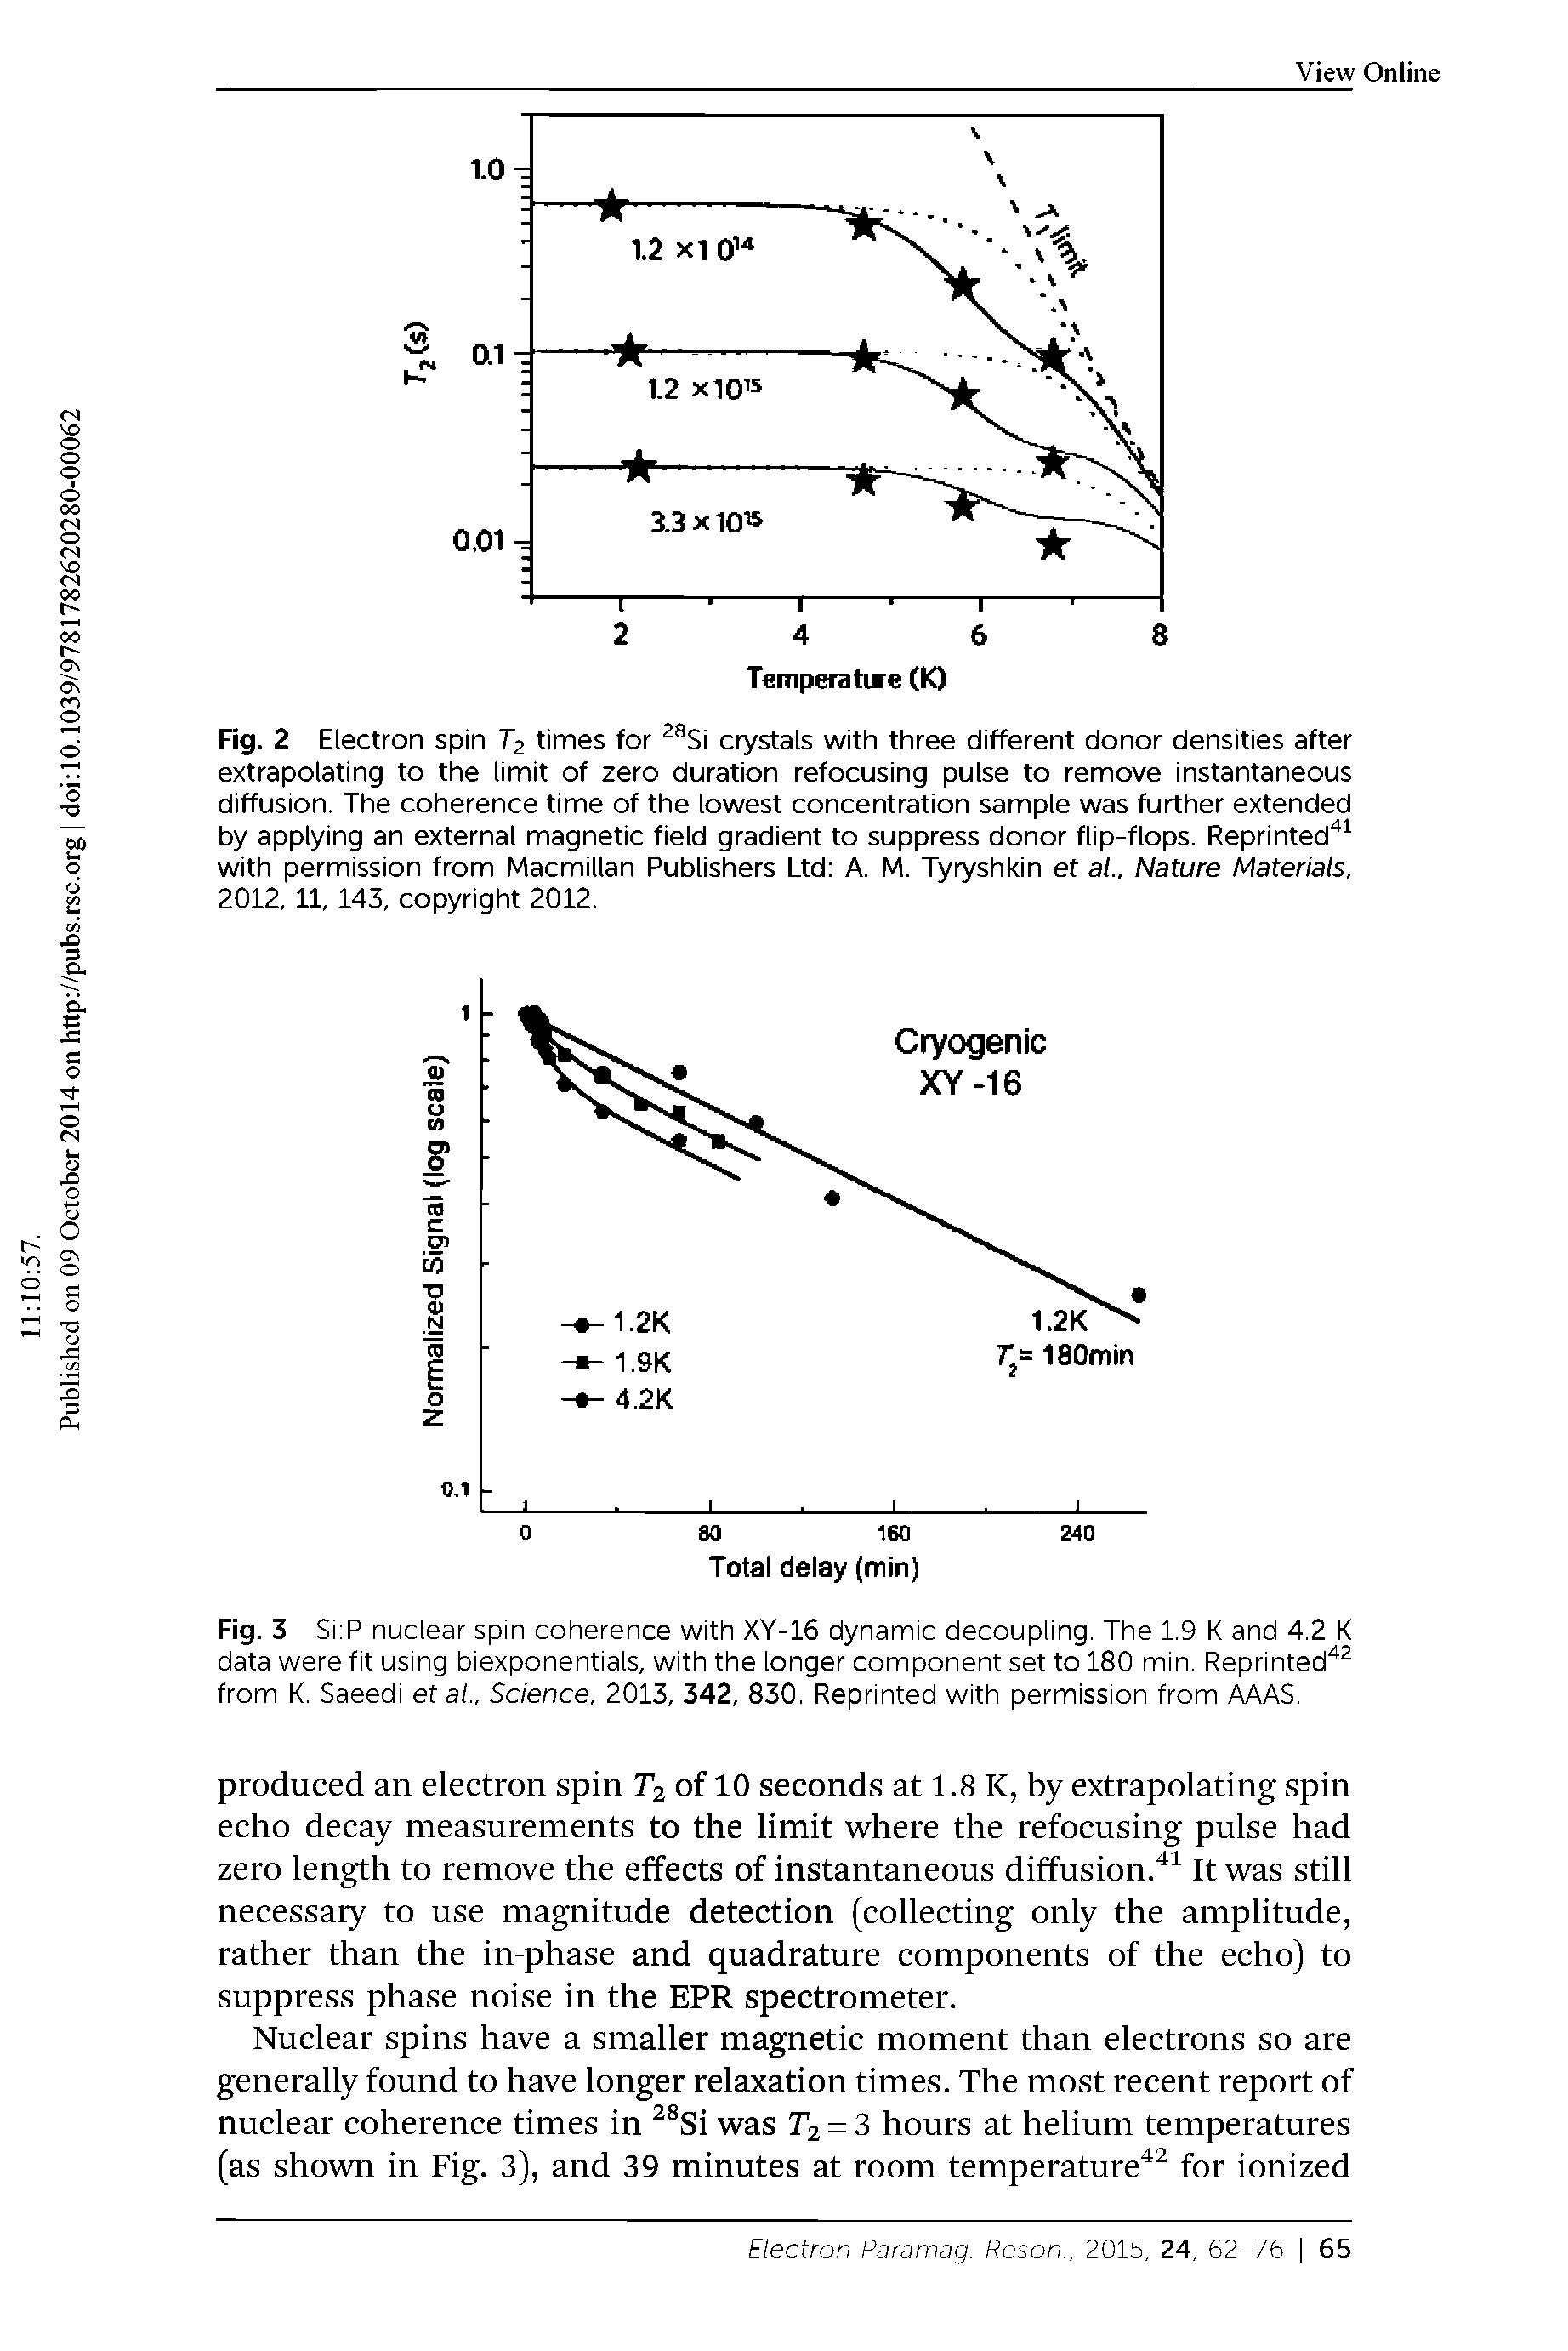 Fig. 2 Electron spin T2 times for Si crystals with three different donor densities after extrapolating to the limit of zero duration refocusing pulse to remove instantaneous diffusion. The coherence time of the lowest concentration sample was further extended by applying an external magnetic field gradient to suppress donor flip-flops. Reprinted with permission from Macmillan Publishers Ltd A. M. Tyryshkin et a/.. Nature Materials, 2012, 11, 143, copyright 2012.